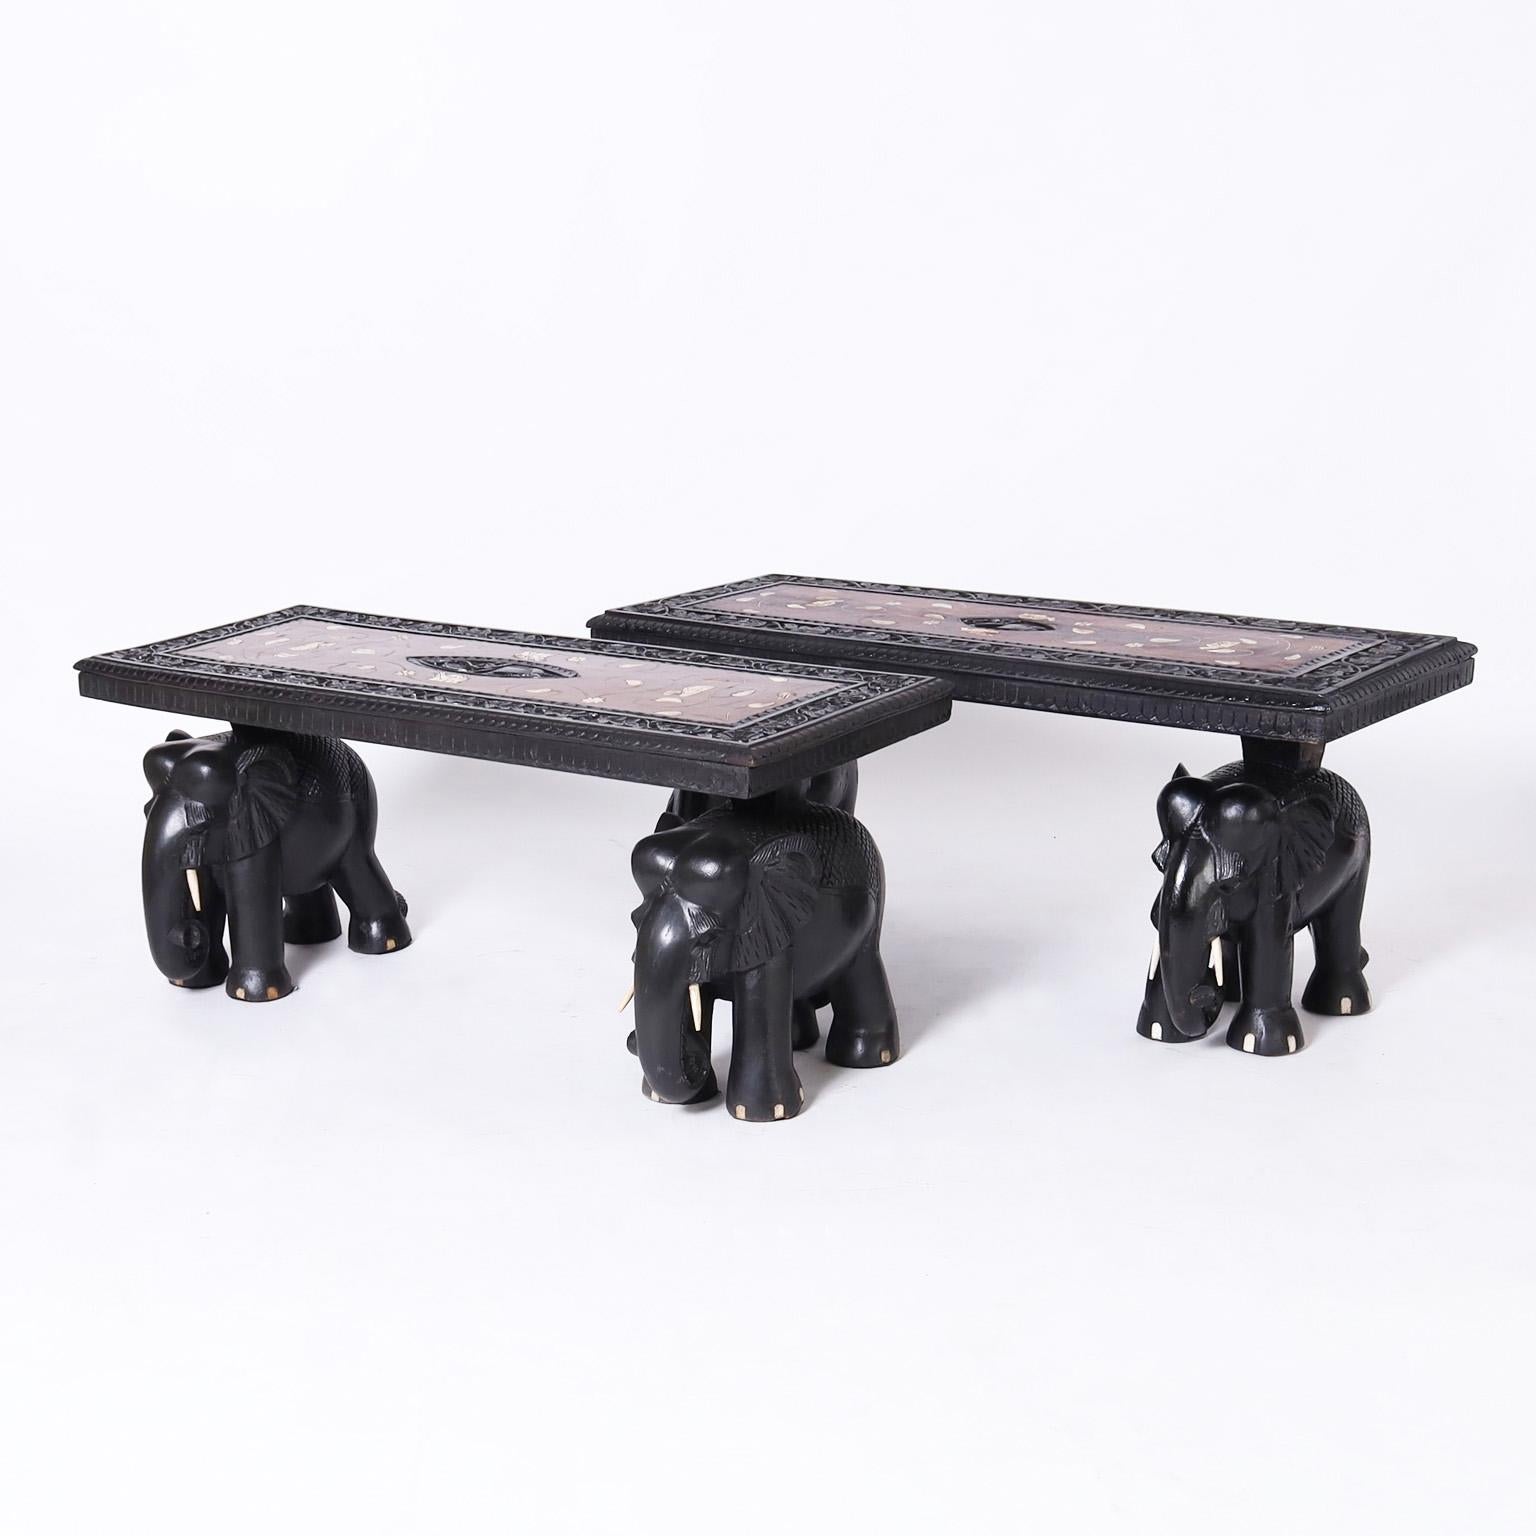 Rare and remarkable pair of Anglo Indian tables or benches crafted in mahogany and having tops with center elephant carvings surrounded by a field of inlaid bone in an ebonized carved floral border. The carved elephant bases are ebonized with bone